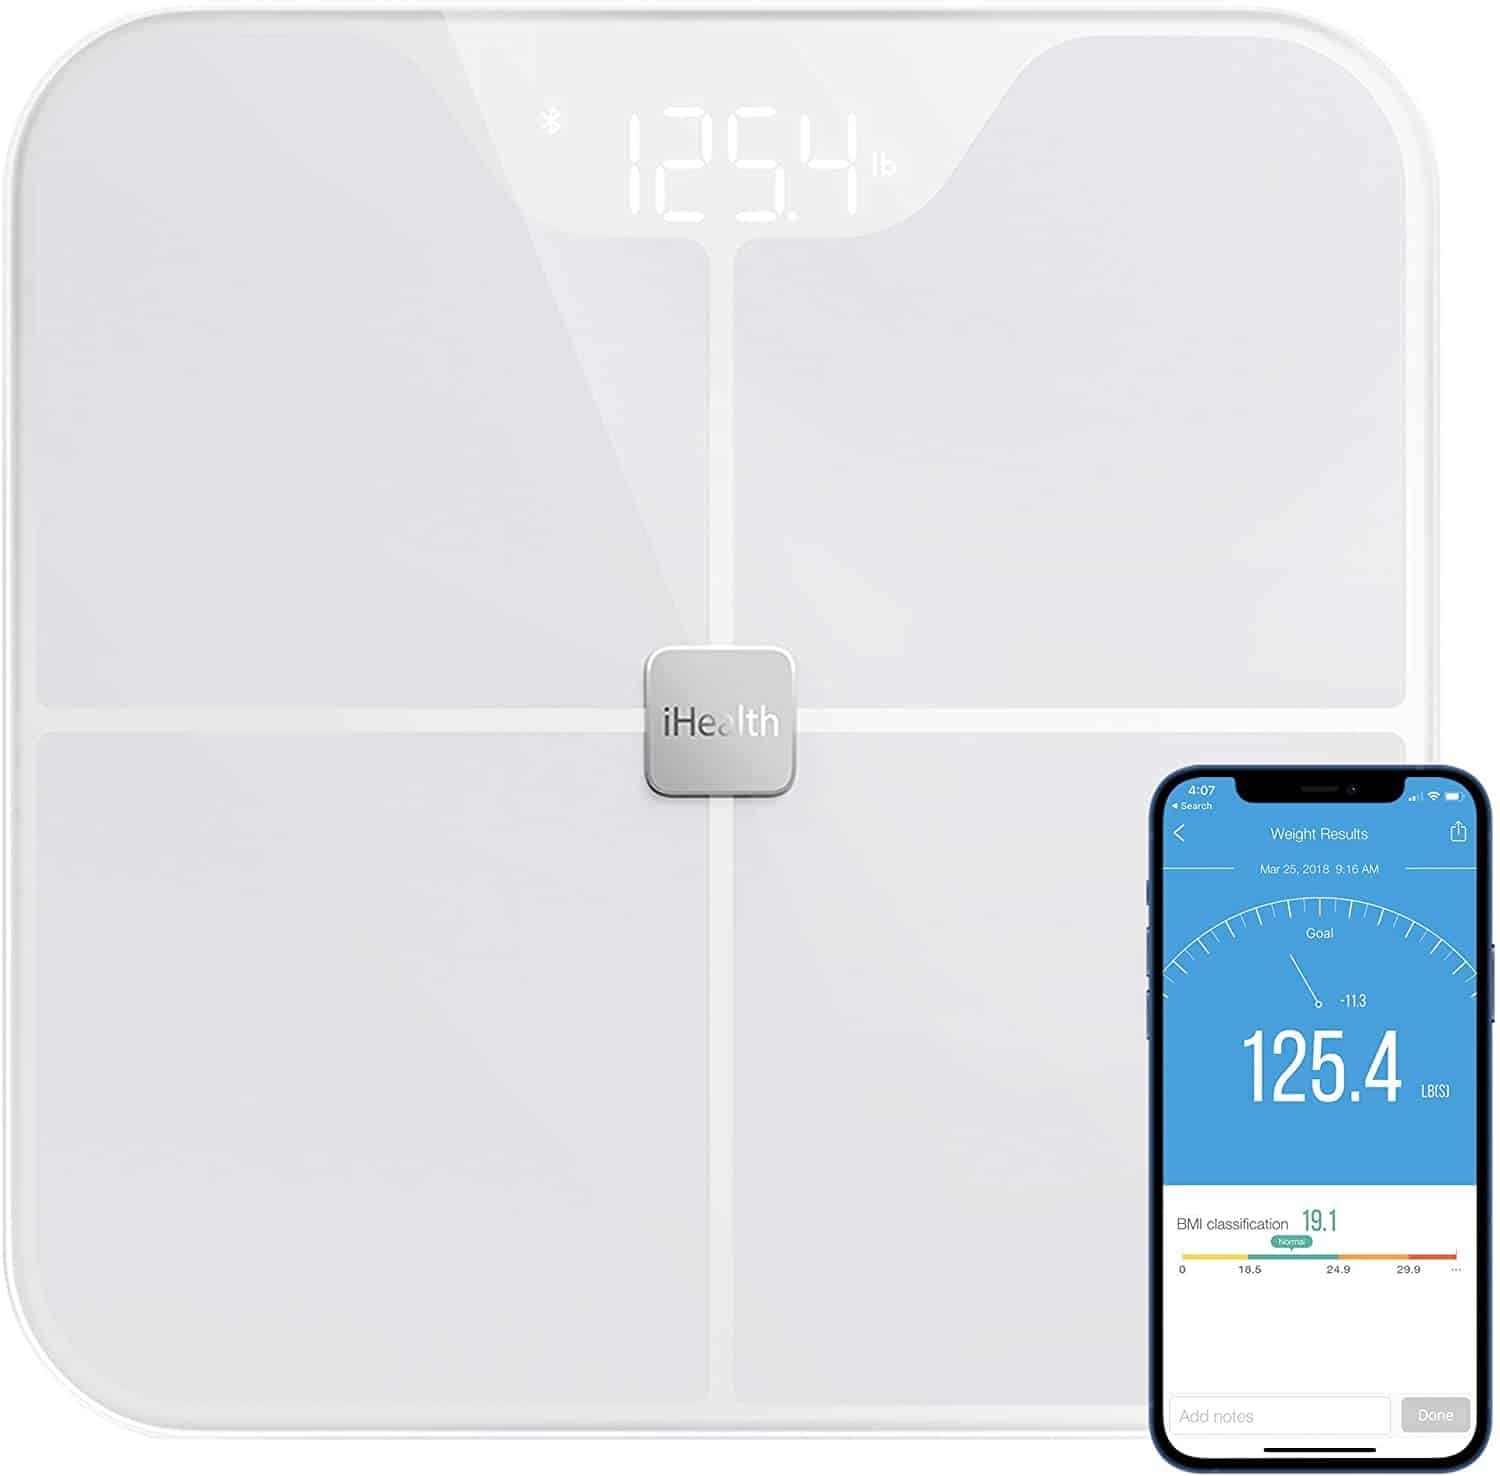 iHealth Nexus Body Fat Scale Smart ranks as one of the best options for tracking body fat percentage